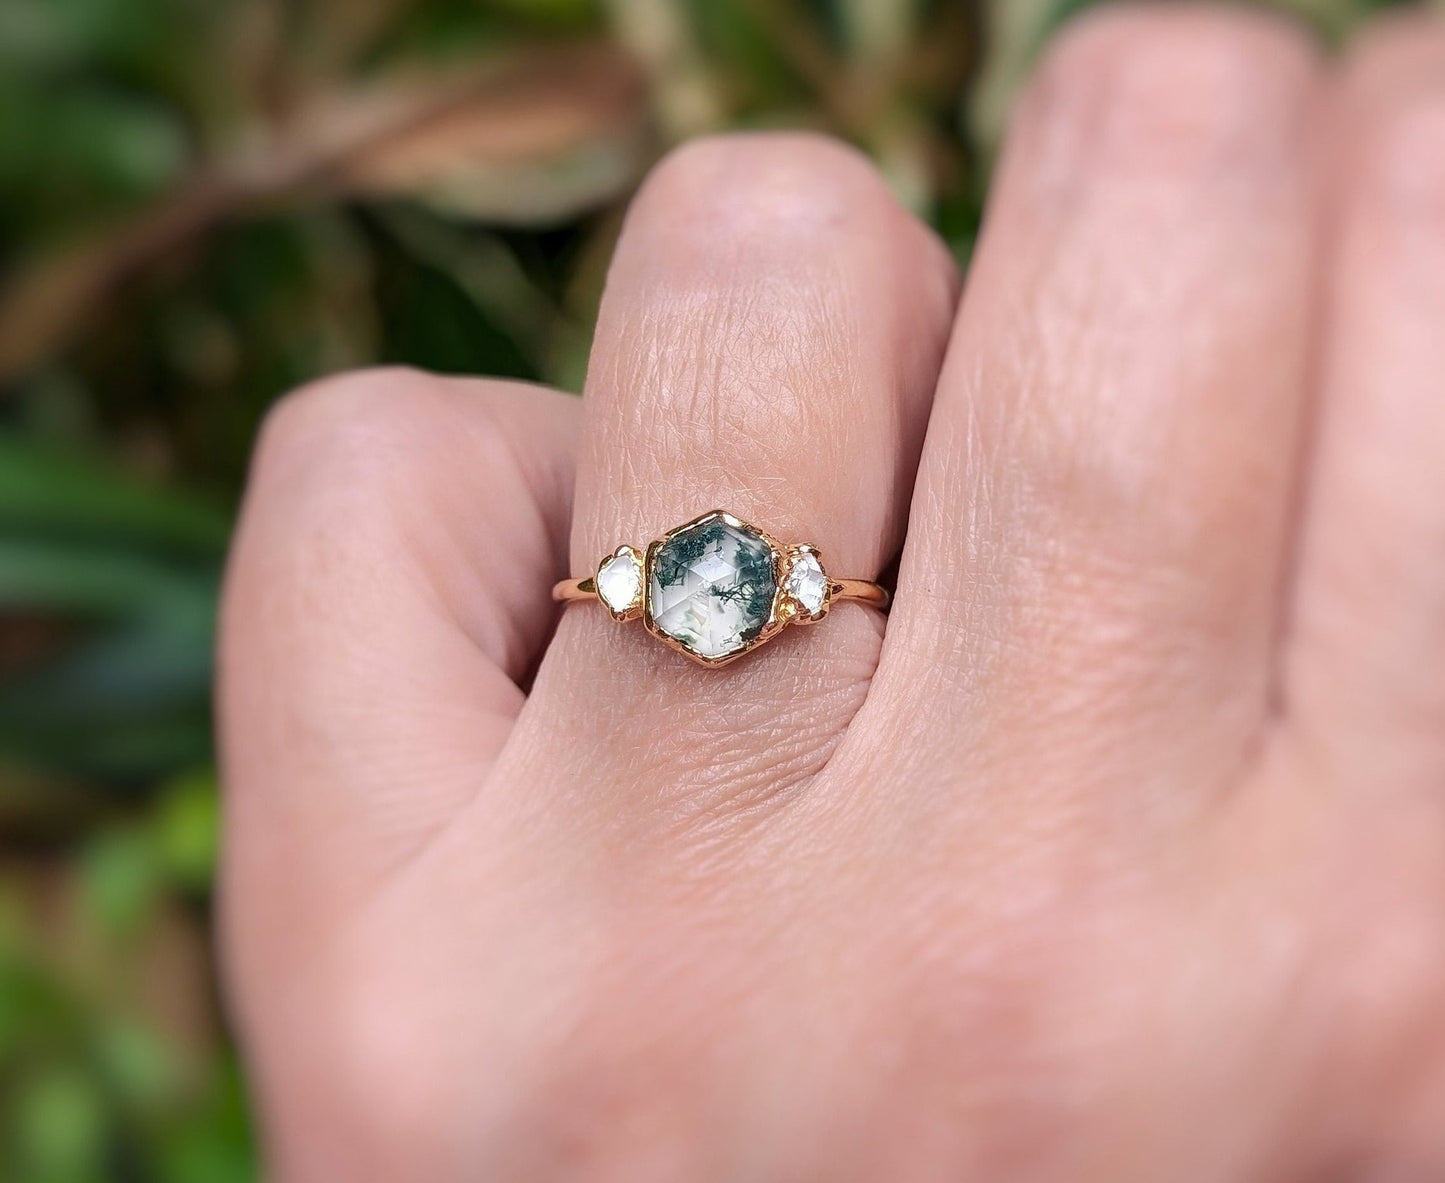 Moss Agate and Herkimer diamond engagement ring - Hexagon shape Moss Agate ring